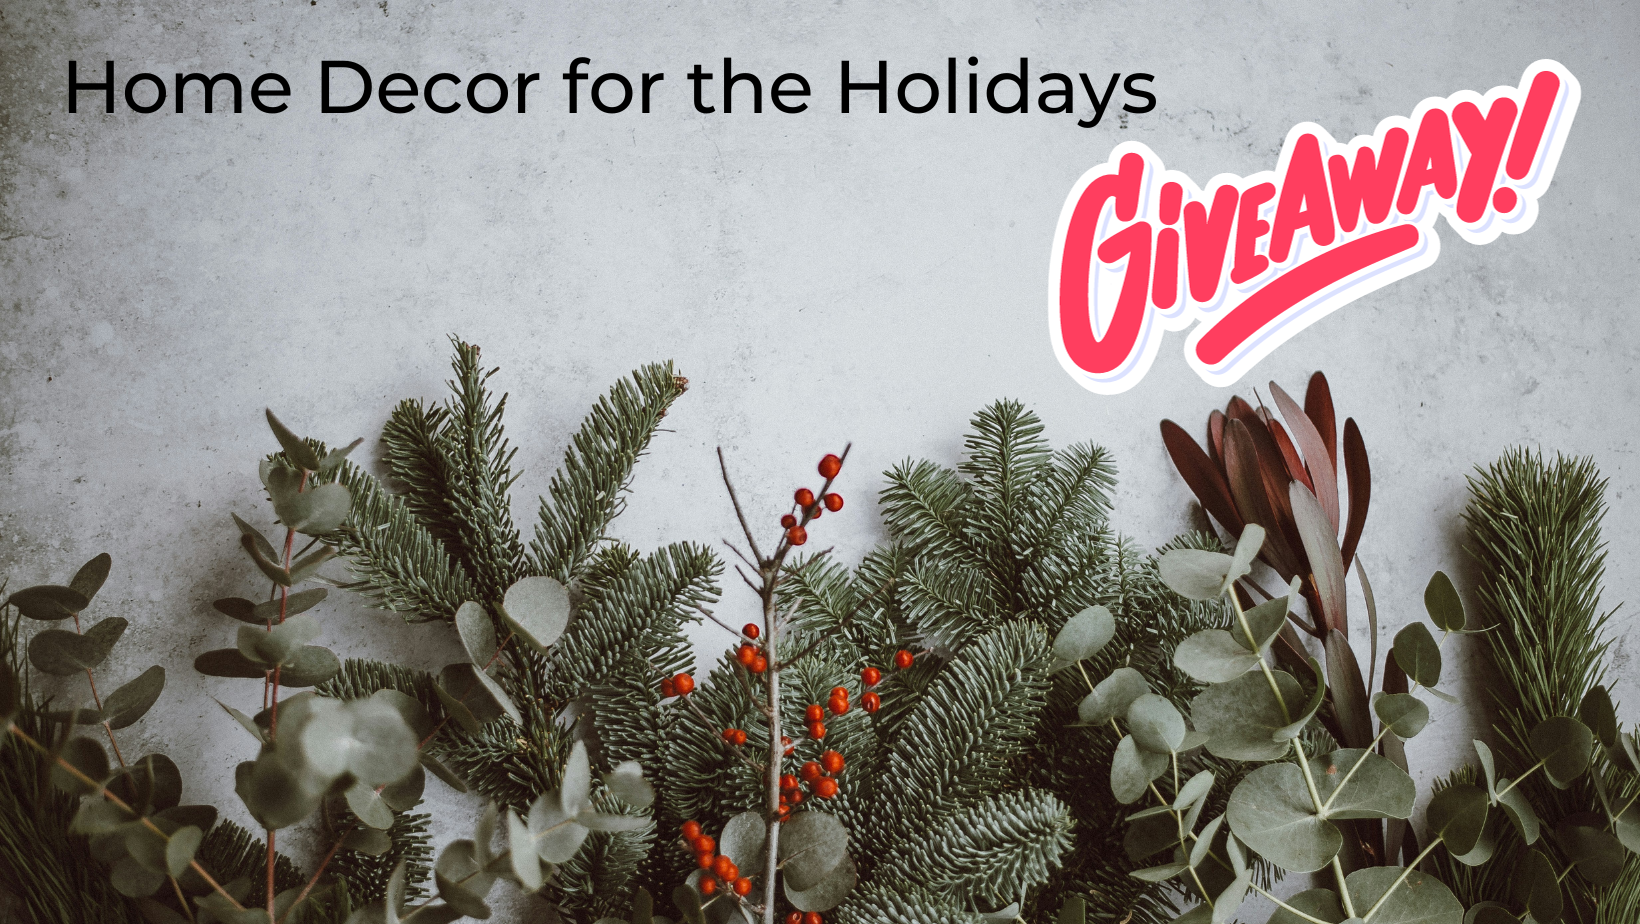 Home Decor for the Holidays:  Inspiring Christmas Ideas to Spread Joy Throughout Your Home... and a Giveaway!